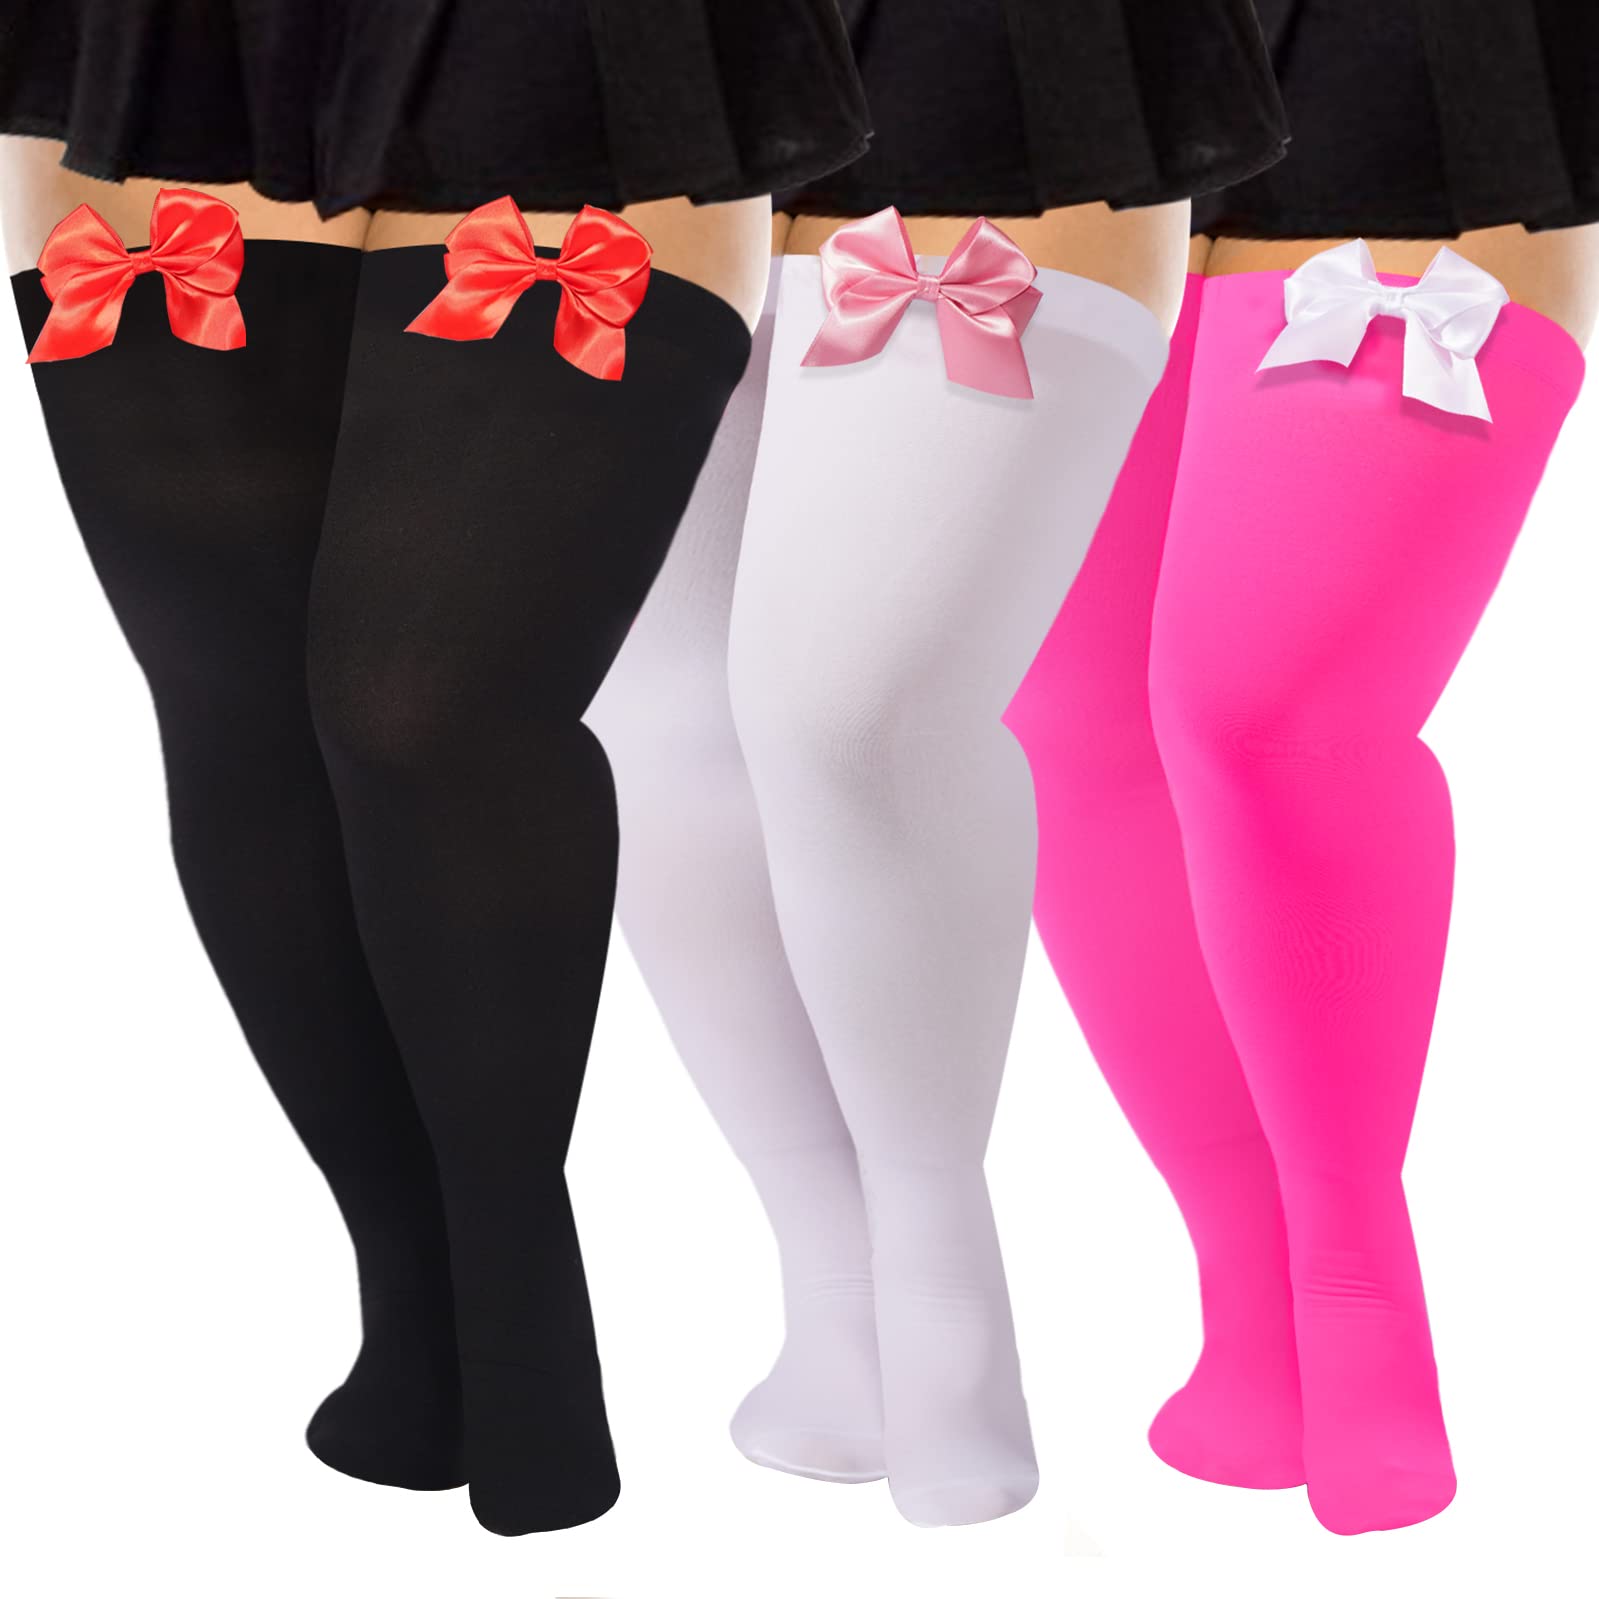 3 Pairs Women Plus Size Bow Thigh Highs Stockings-White & Black & Pink - Moon Wood